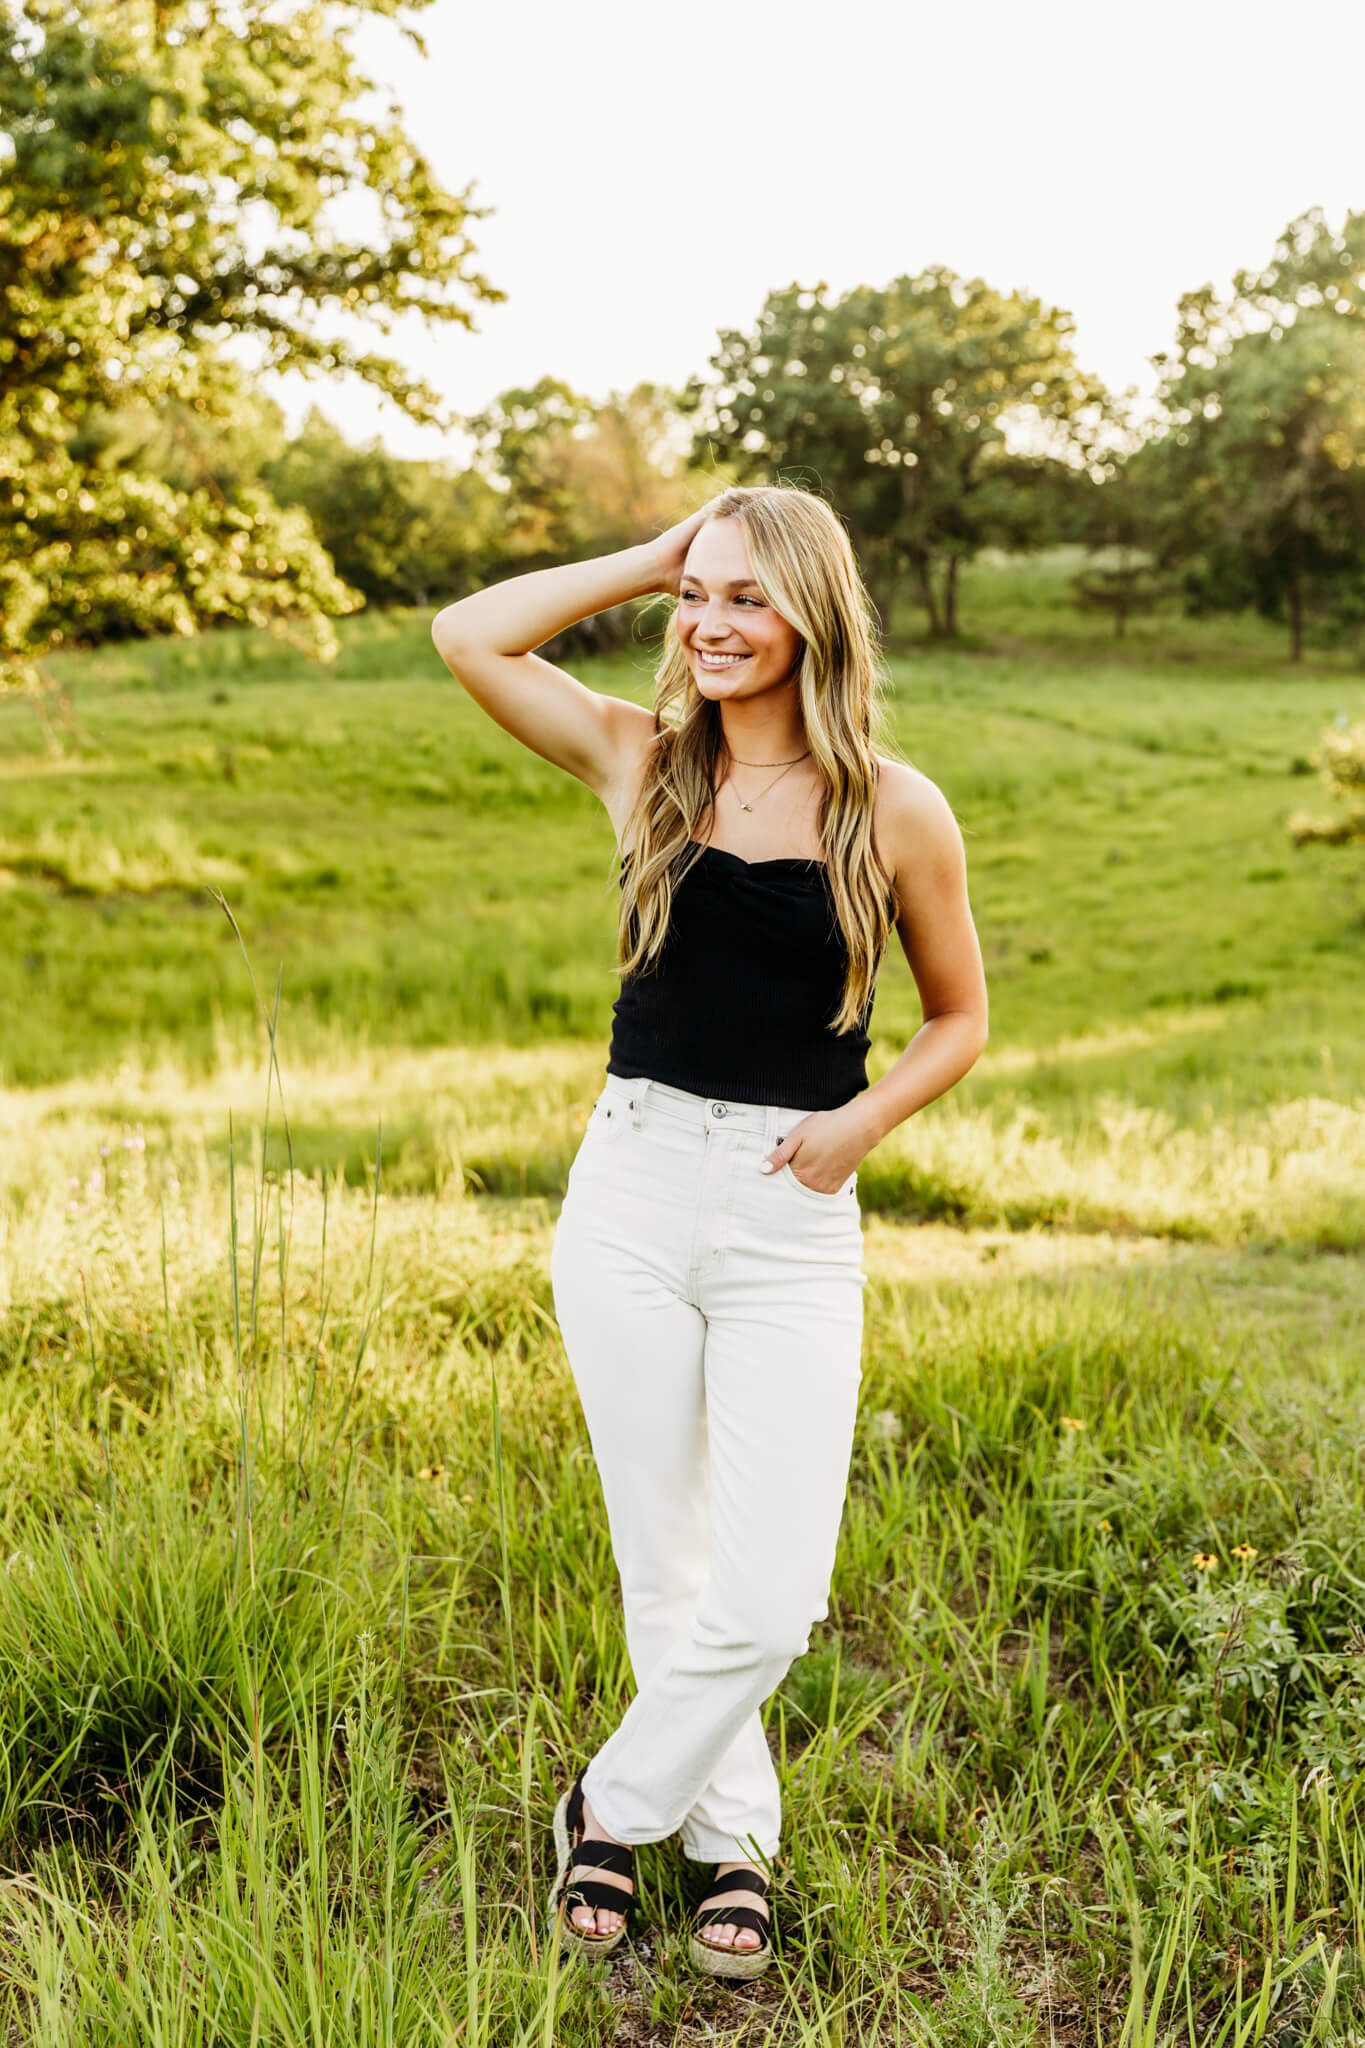 beautiful high school girl in white pants and a black top standing with her ankles crossed, one hand in her pocket and one in her hair as she looks out into the distance smiling